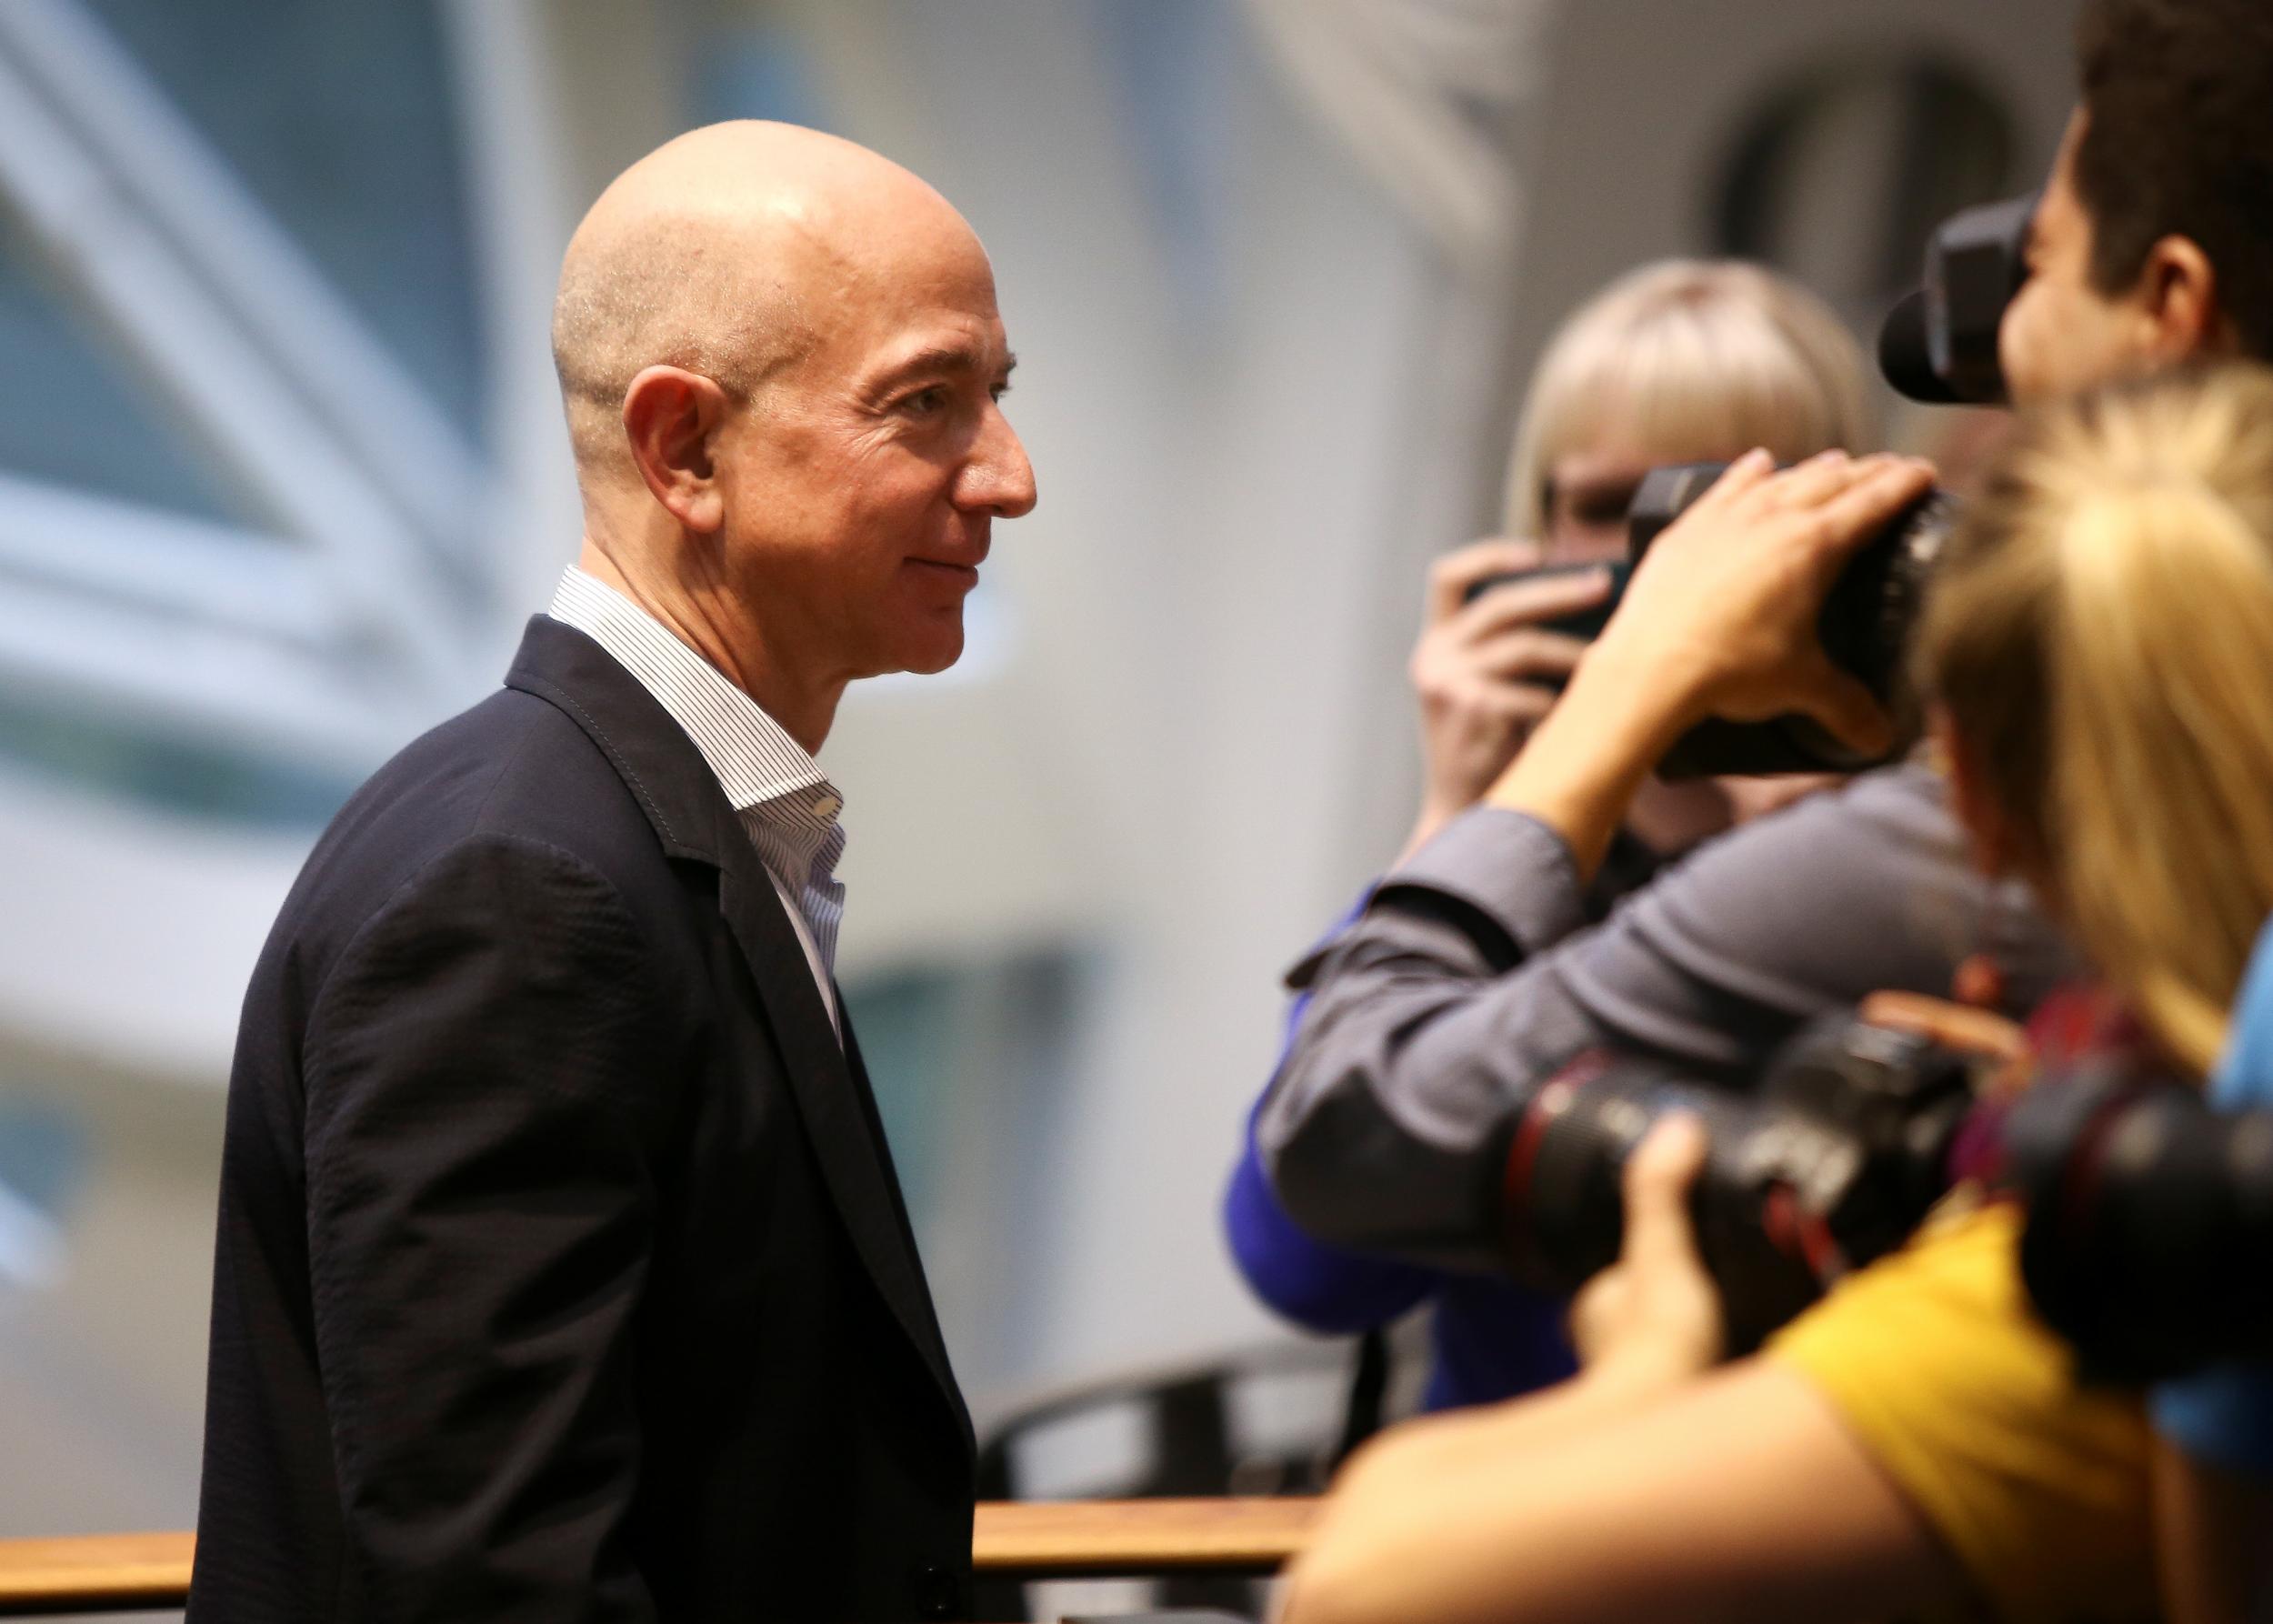 Amazon, alongside JPMorgan and Berkshire Hathaway, will form a new independent healthcare business for their US employees